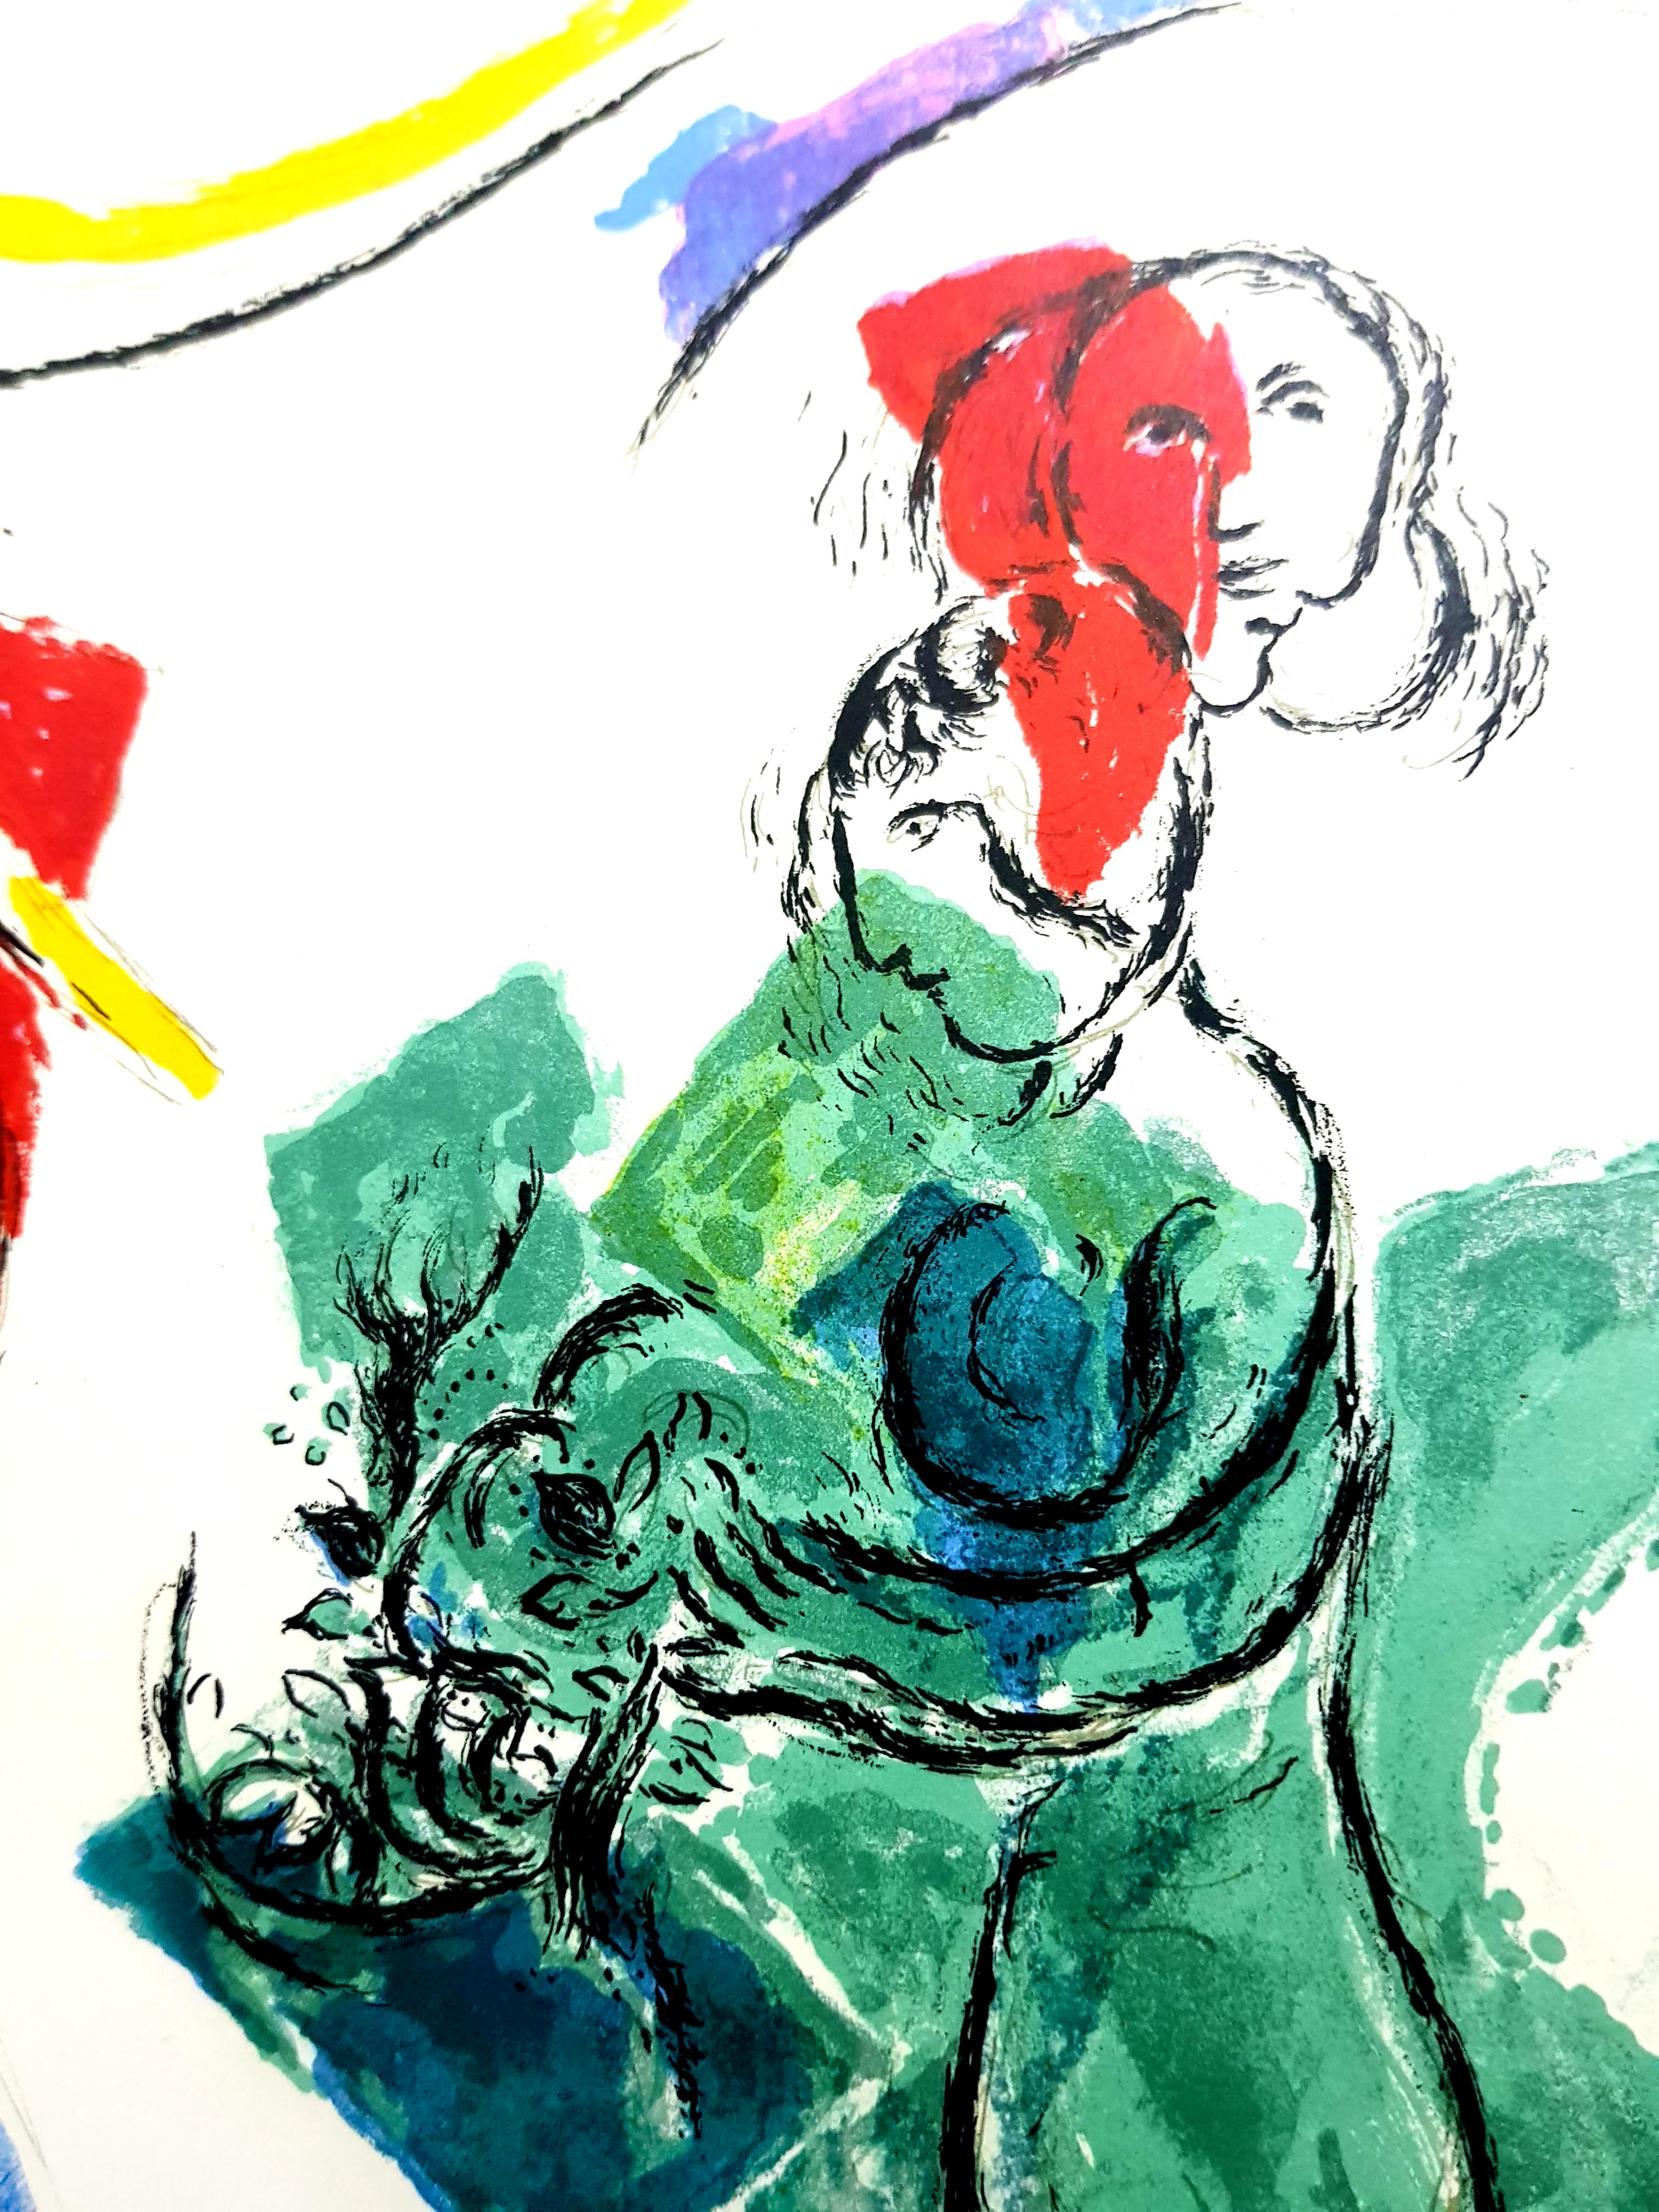 After Marc Chagall -  Lithograph - Modern Print by (after) Marc Chagall